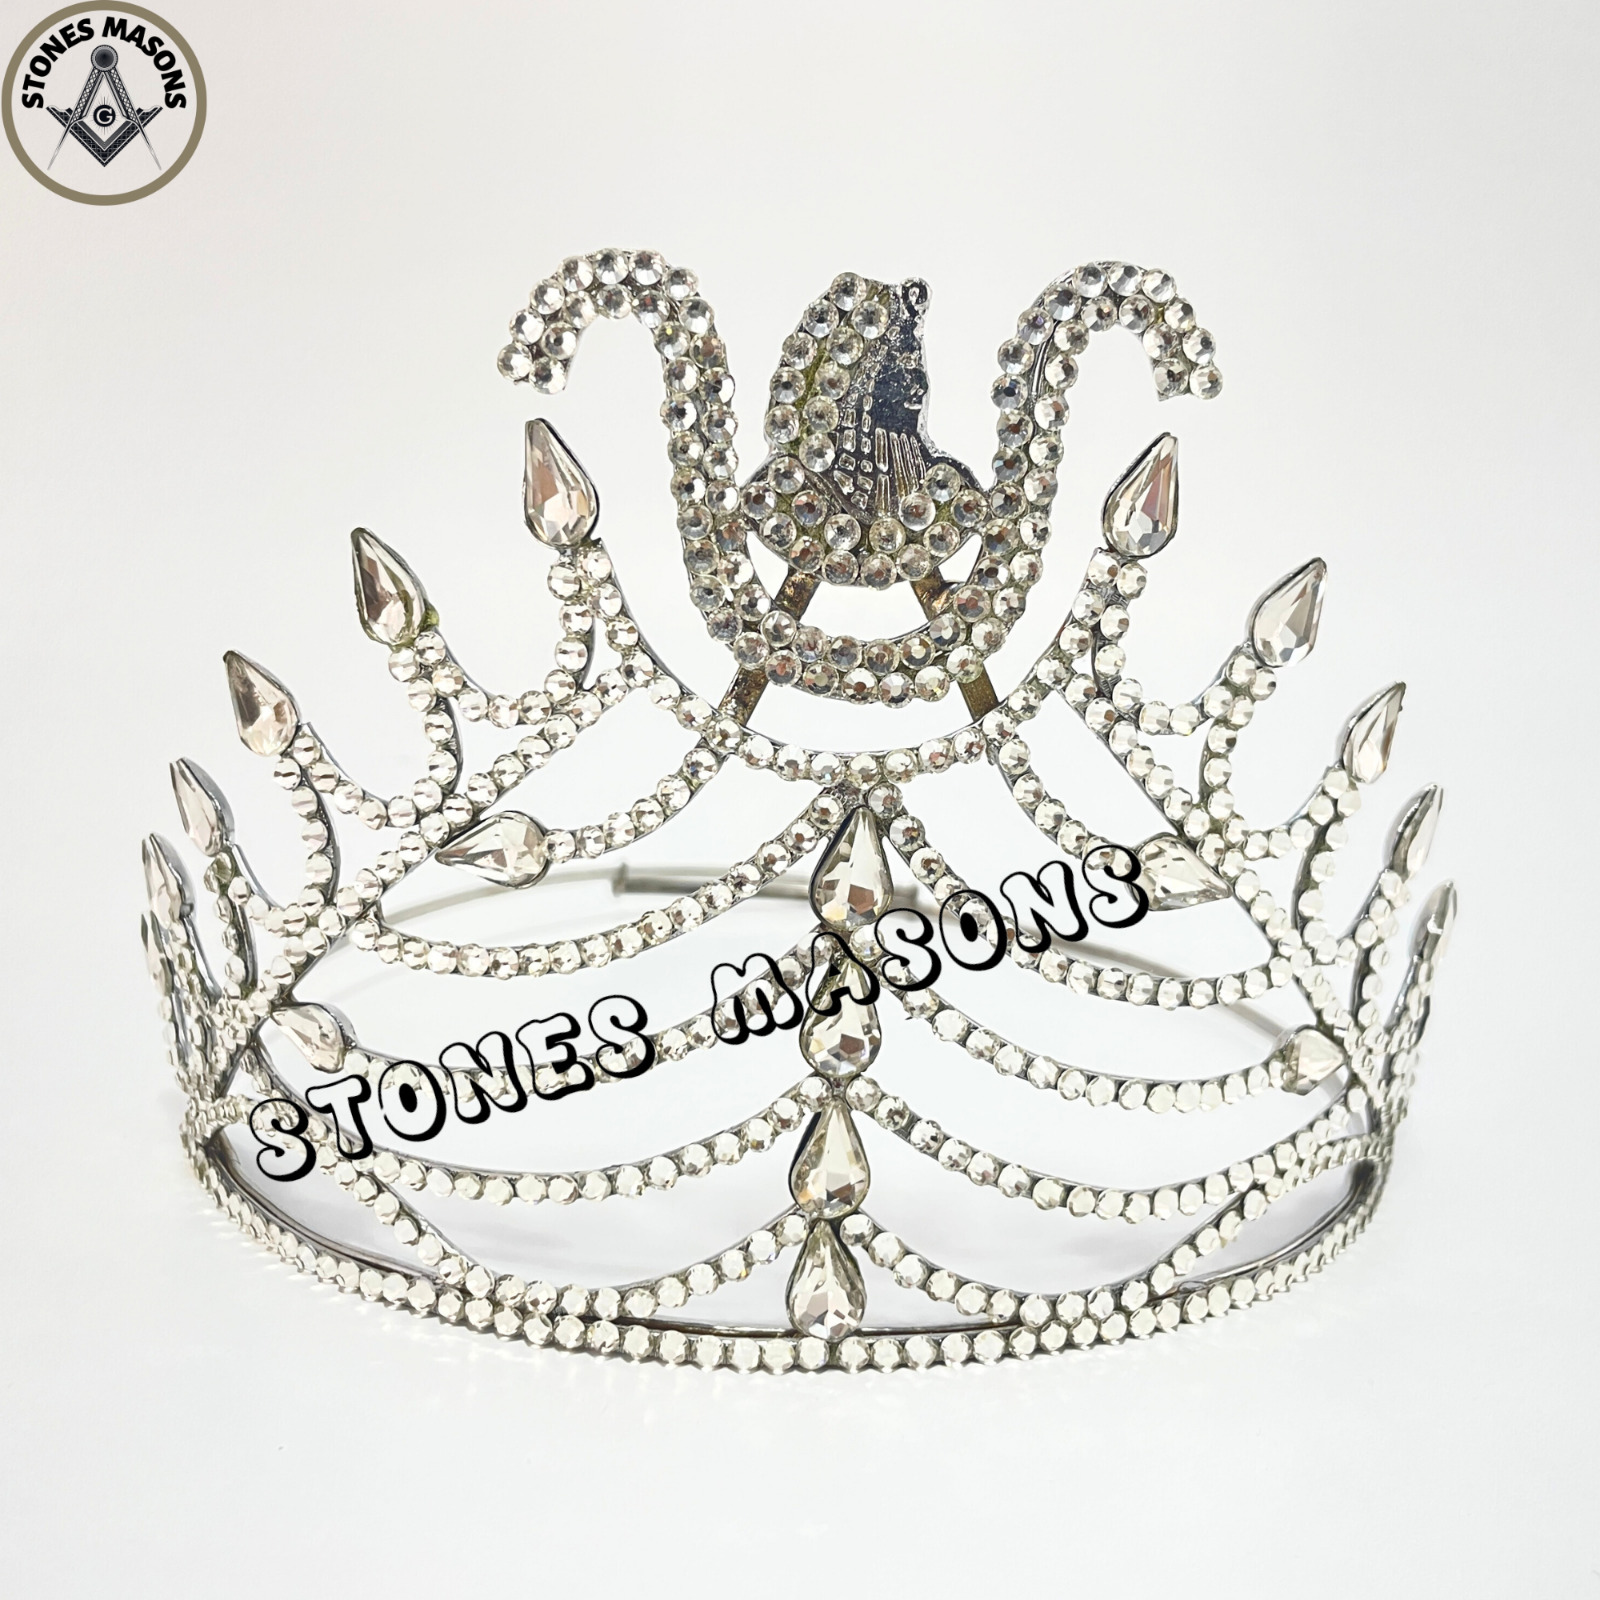 DOI CROWN, Masonic Daughter Of ISIS Crown Silver Tone Best Style Adjustable Fitt